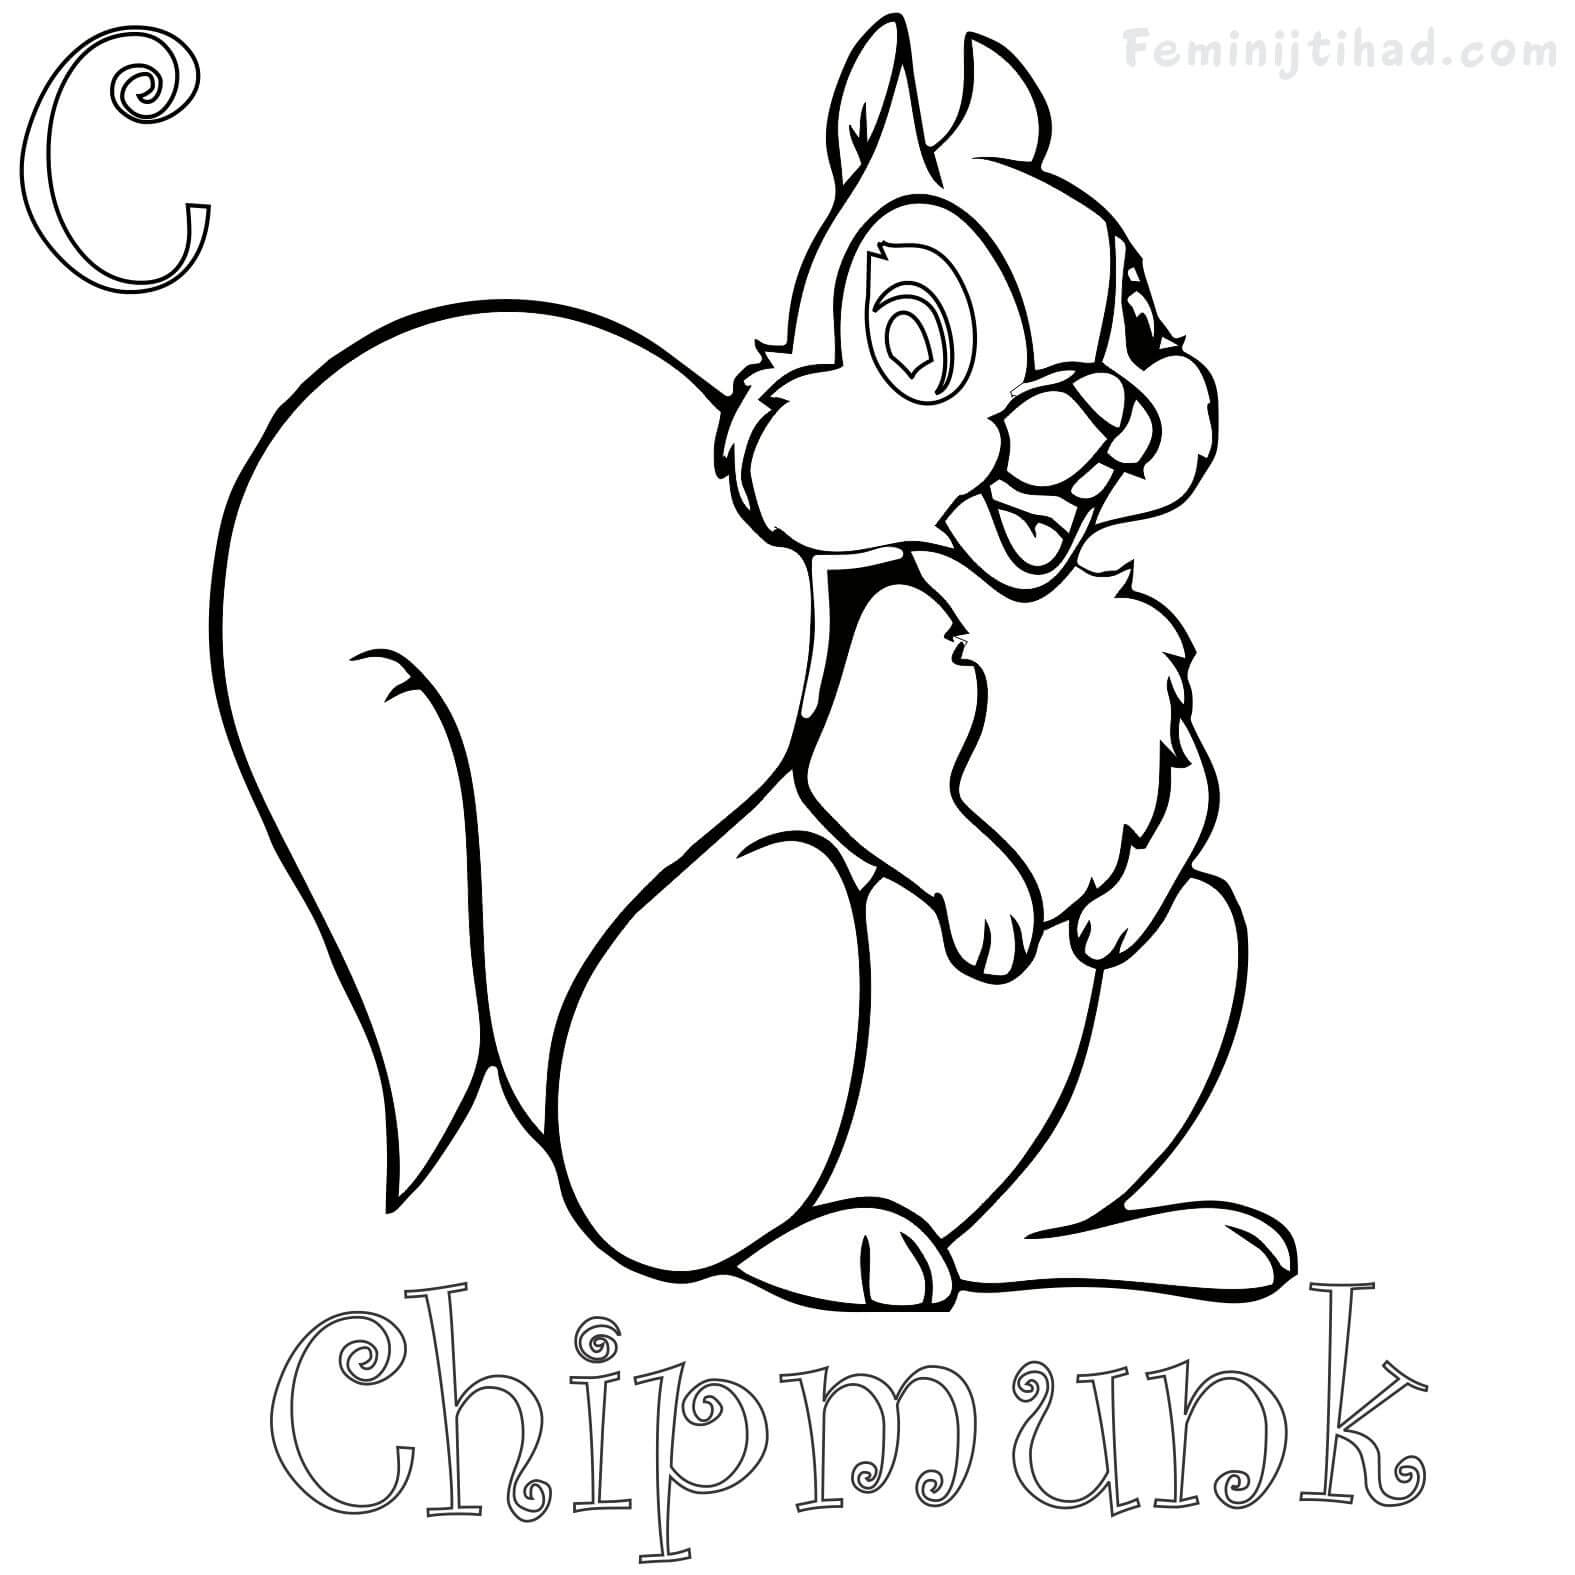 free printable coloring page of a chipmunk